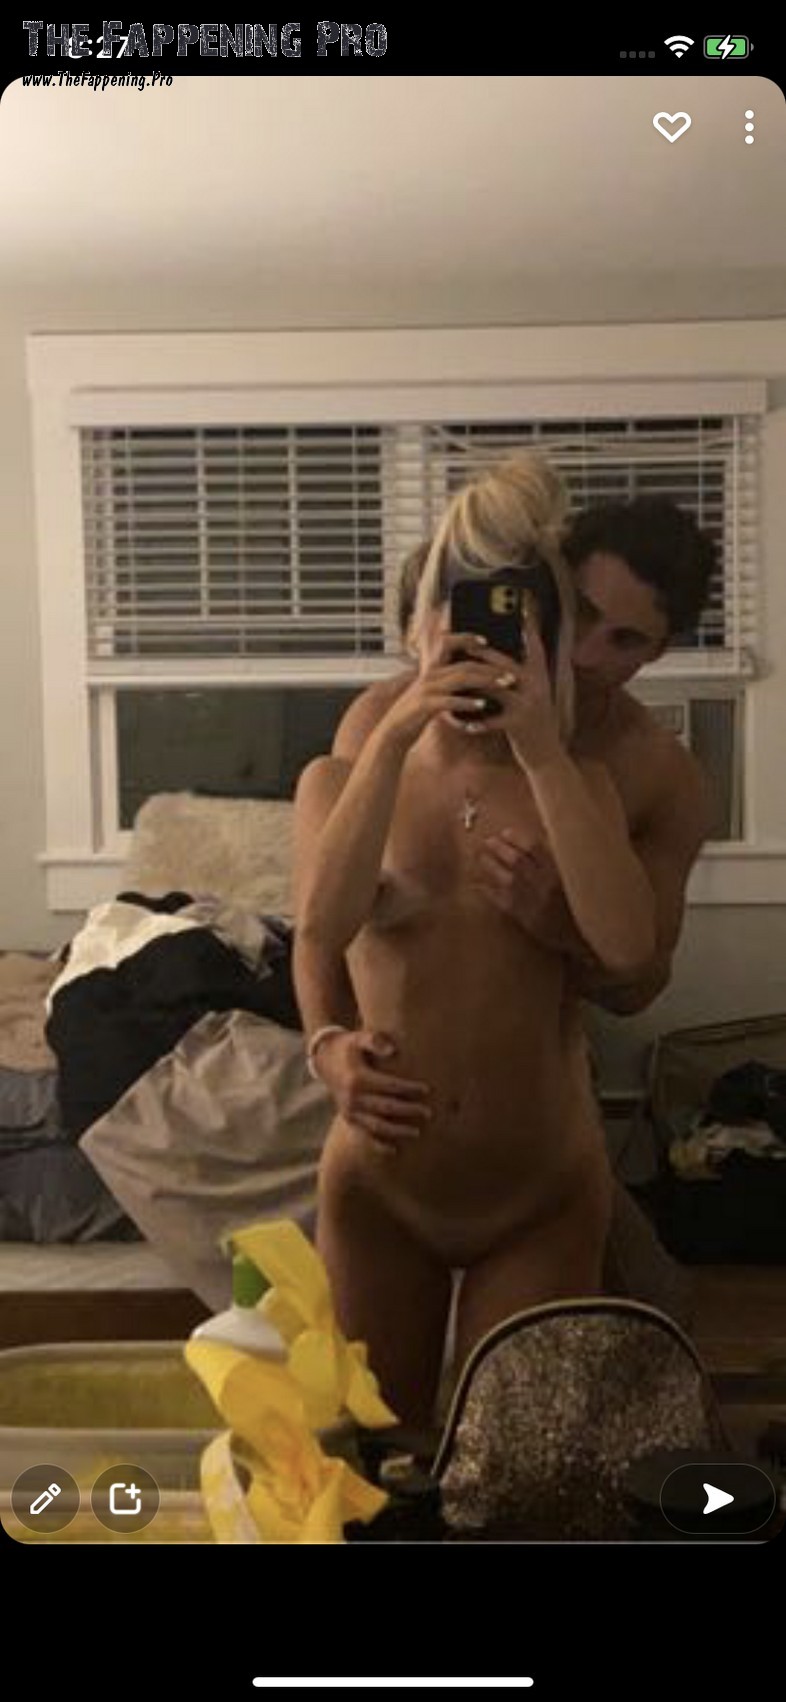 Overtime Megan Nude Leaked TheFappening.Pro 146 - Megan Eugenio aka Overtime Megan Nude TikTok Star From Massachusetts (Over 100 Leaked Photos)